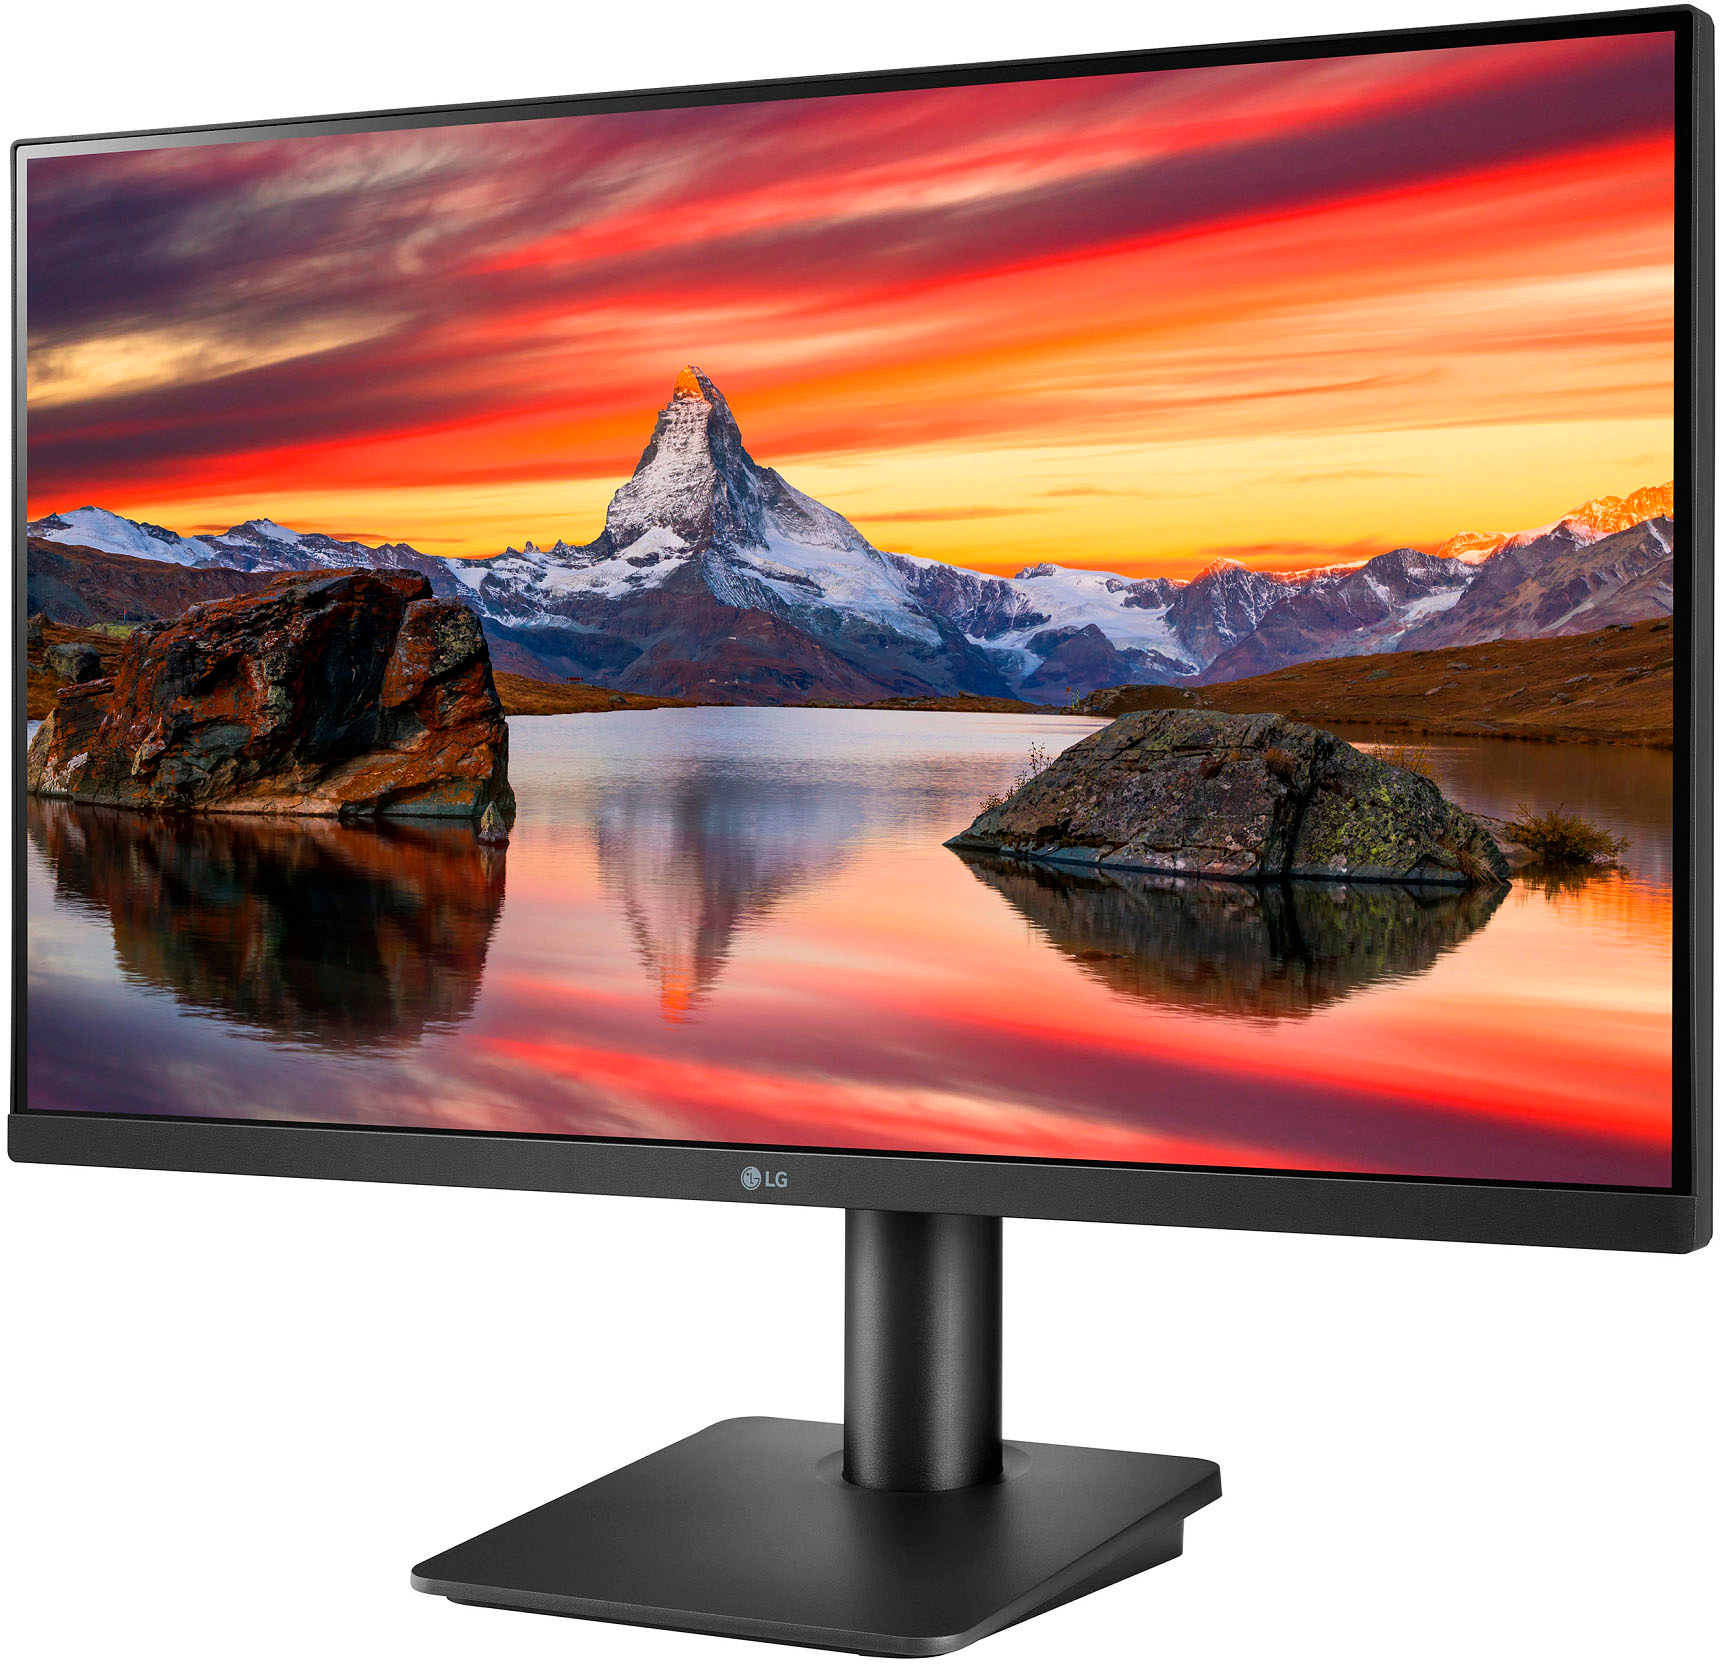 Left View: Samsung - M7B Series 32" Smart Tizen 4K UHD Monitor with HDR10 (HDMI, USB-C) - Black